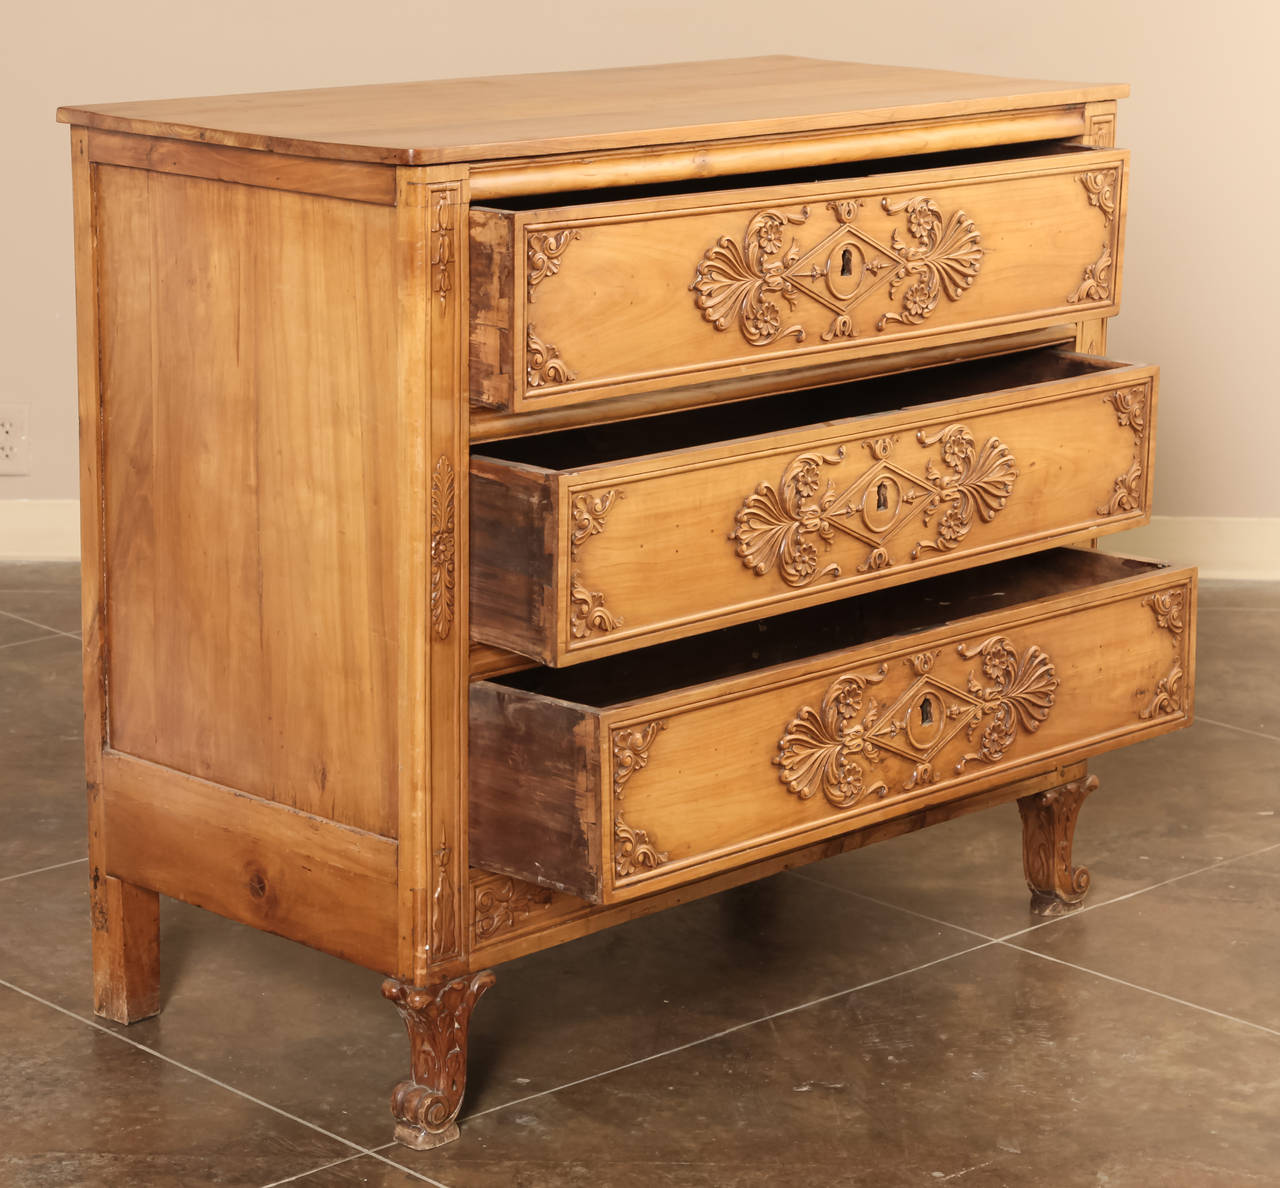 Handcrafted from fine French applewood with an intriguing style statement, this Charles X-period commode will work in any room of the home or office. Unusual bas relief carving across the drawer facades combines with the equally unusual feet and